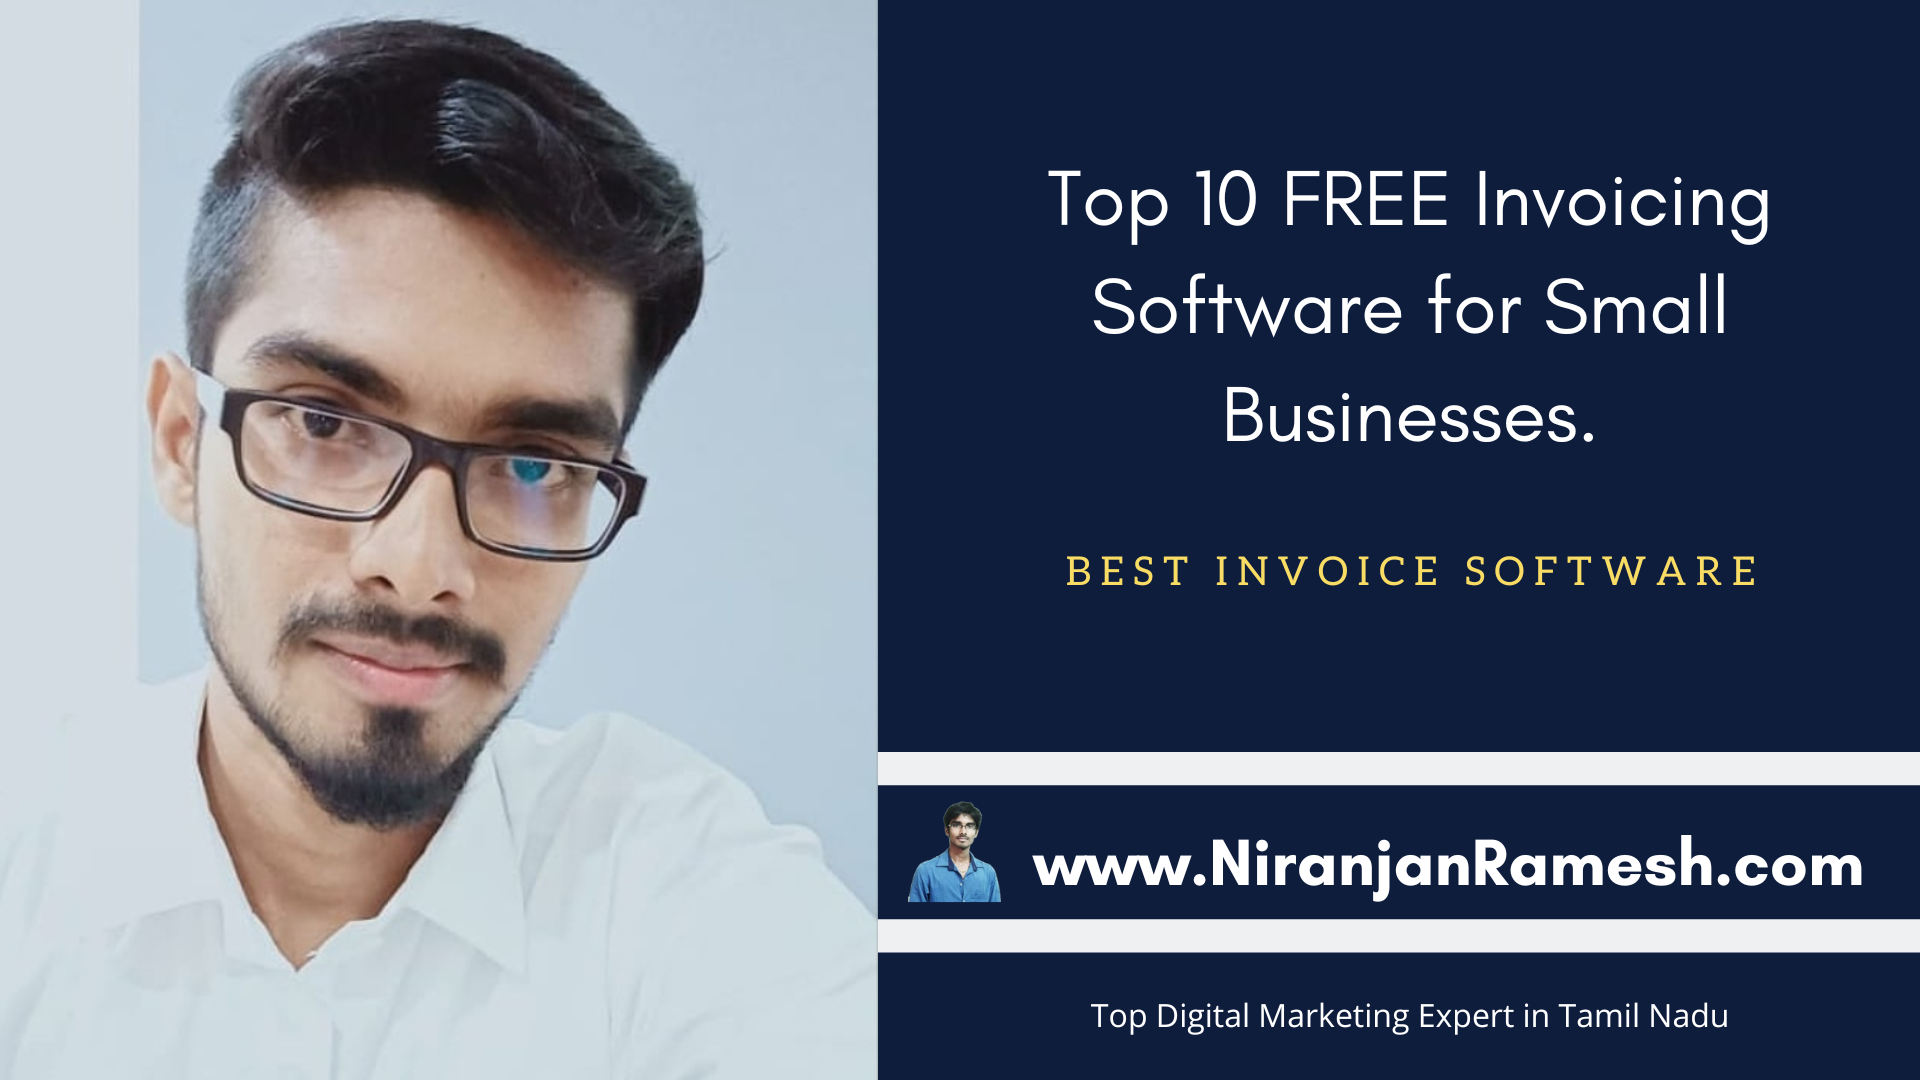 Top 10 FREE Invoicing Software for Small Businesses